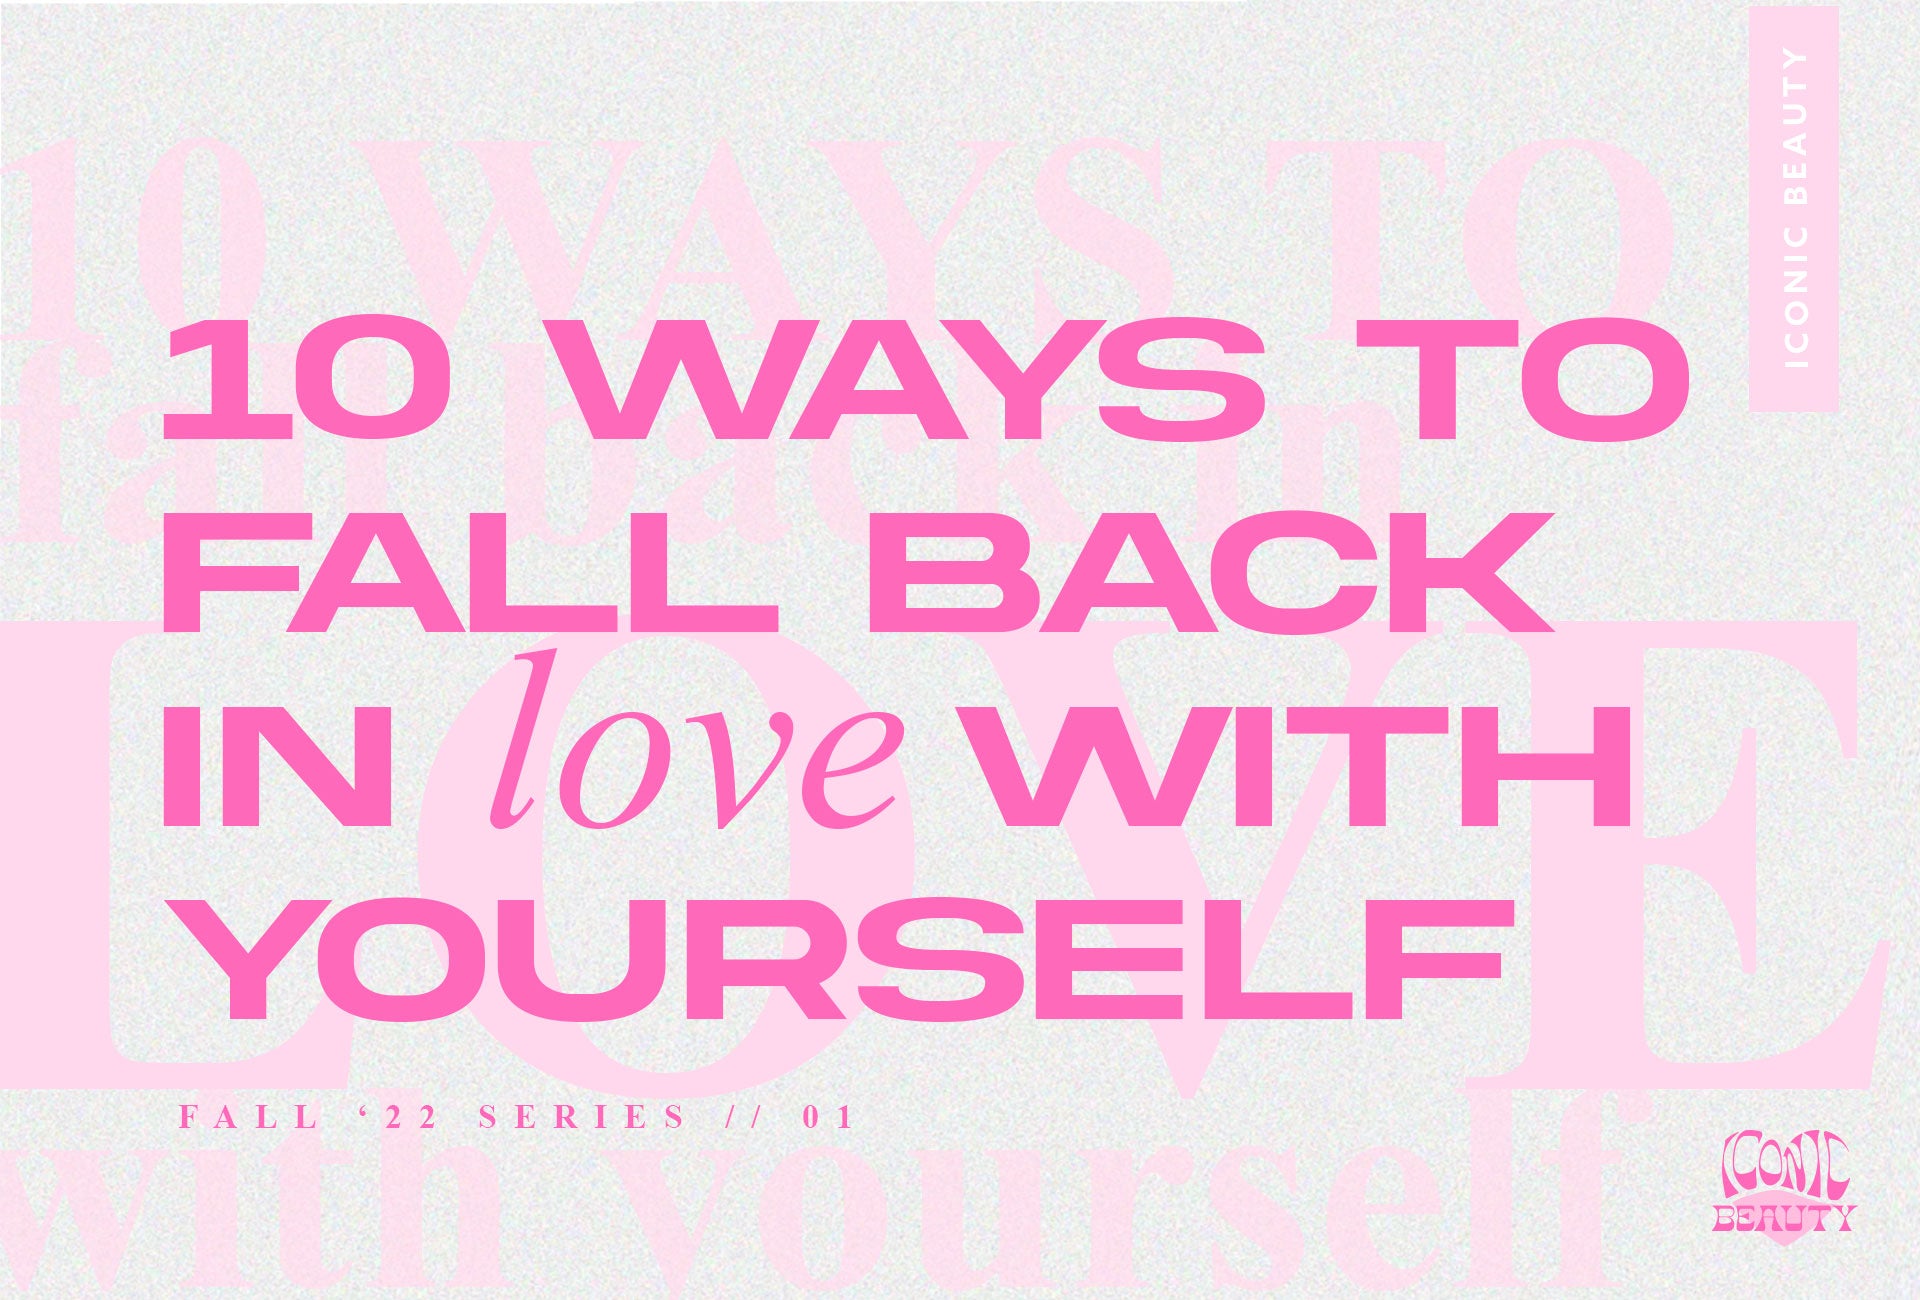 10 Ways to Fall Back in Love With Yourself